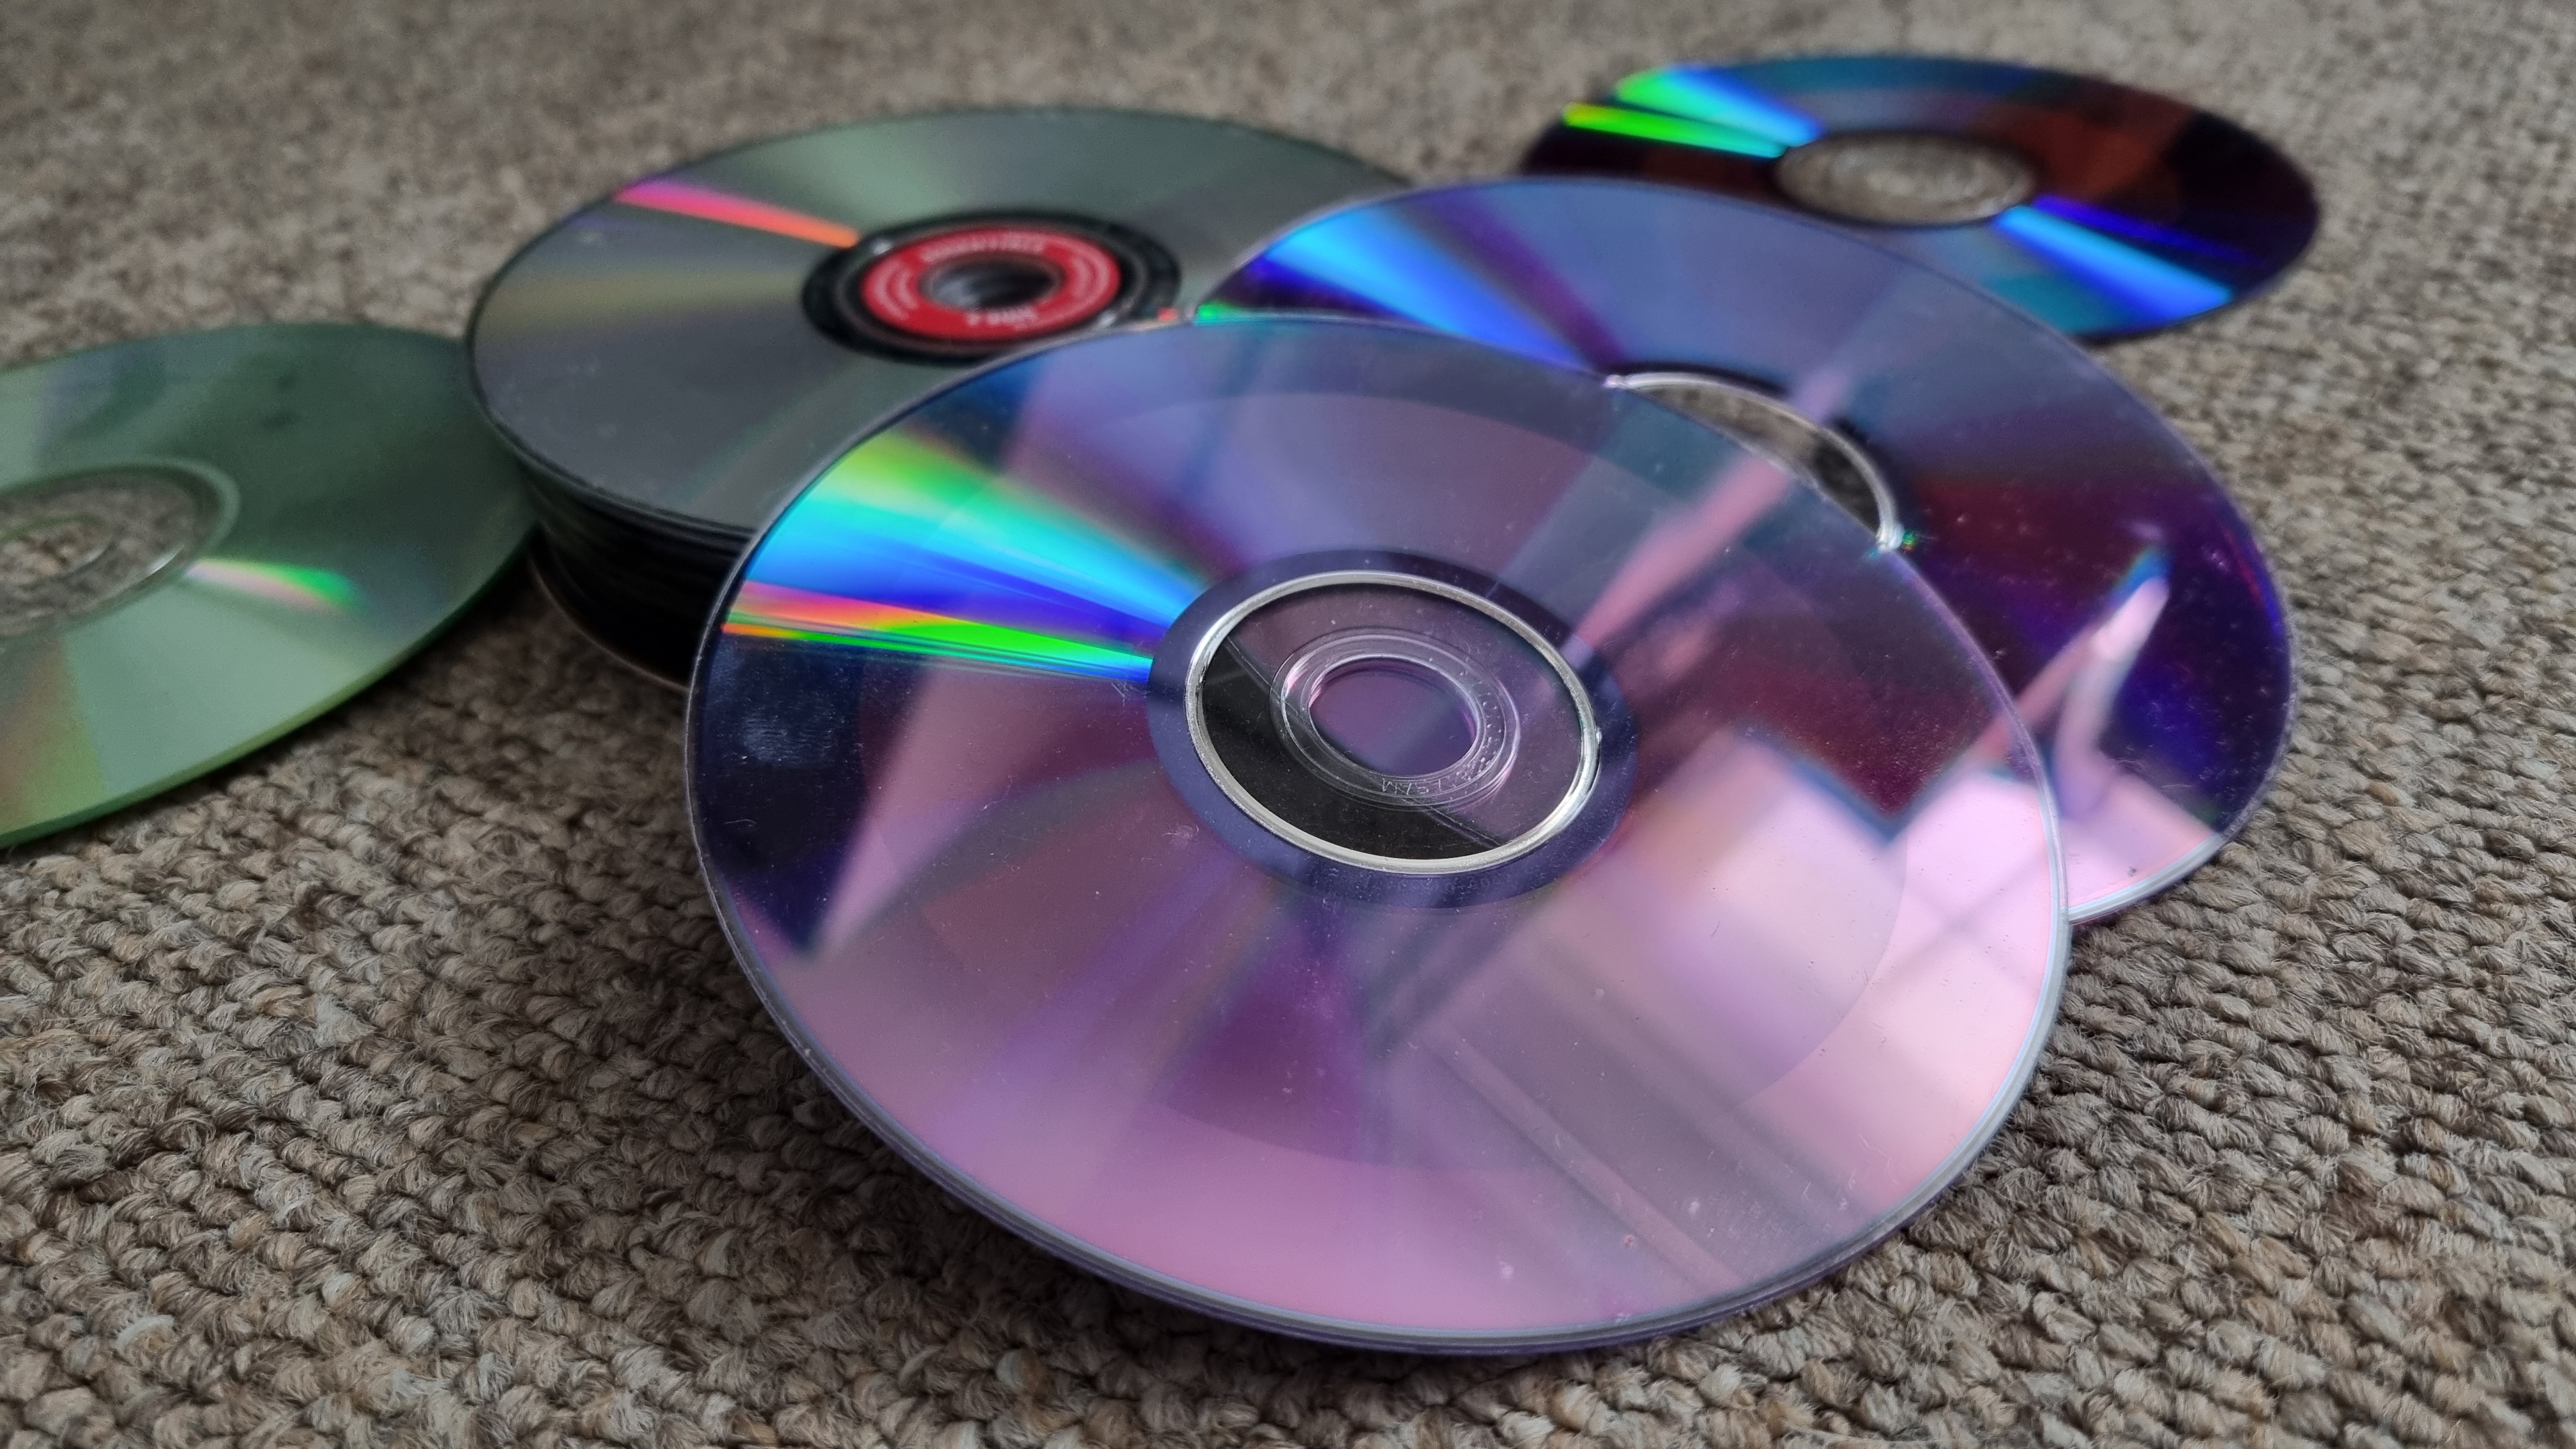  Researchers have developed a Very Big Disc™ that can store up to 200 terabytes of data and may represent a return to optical media for long term storage 